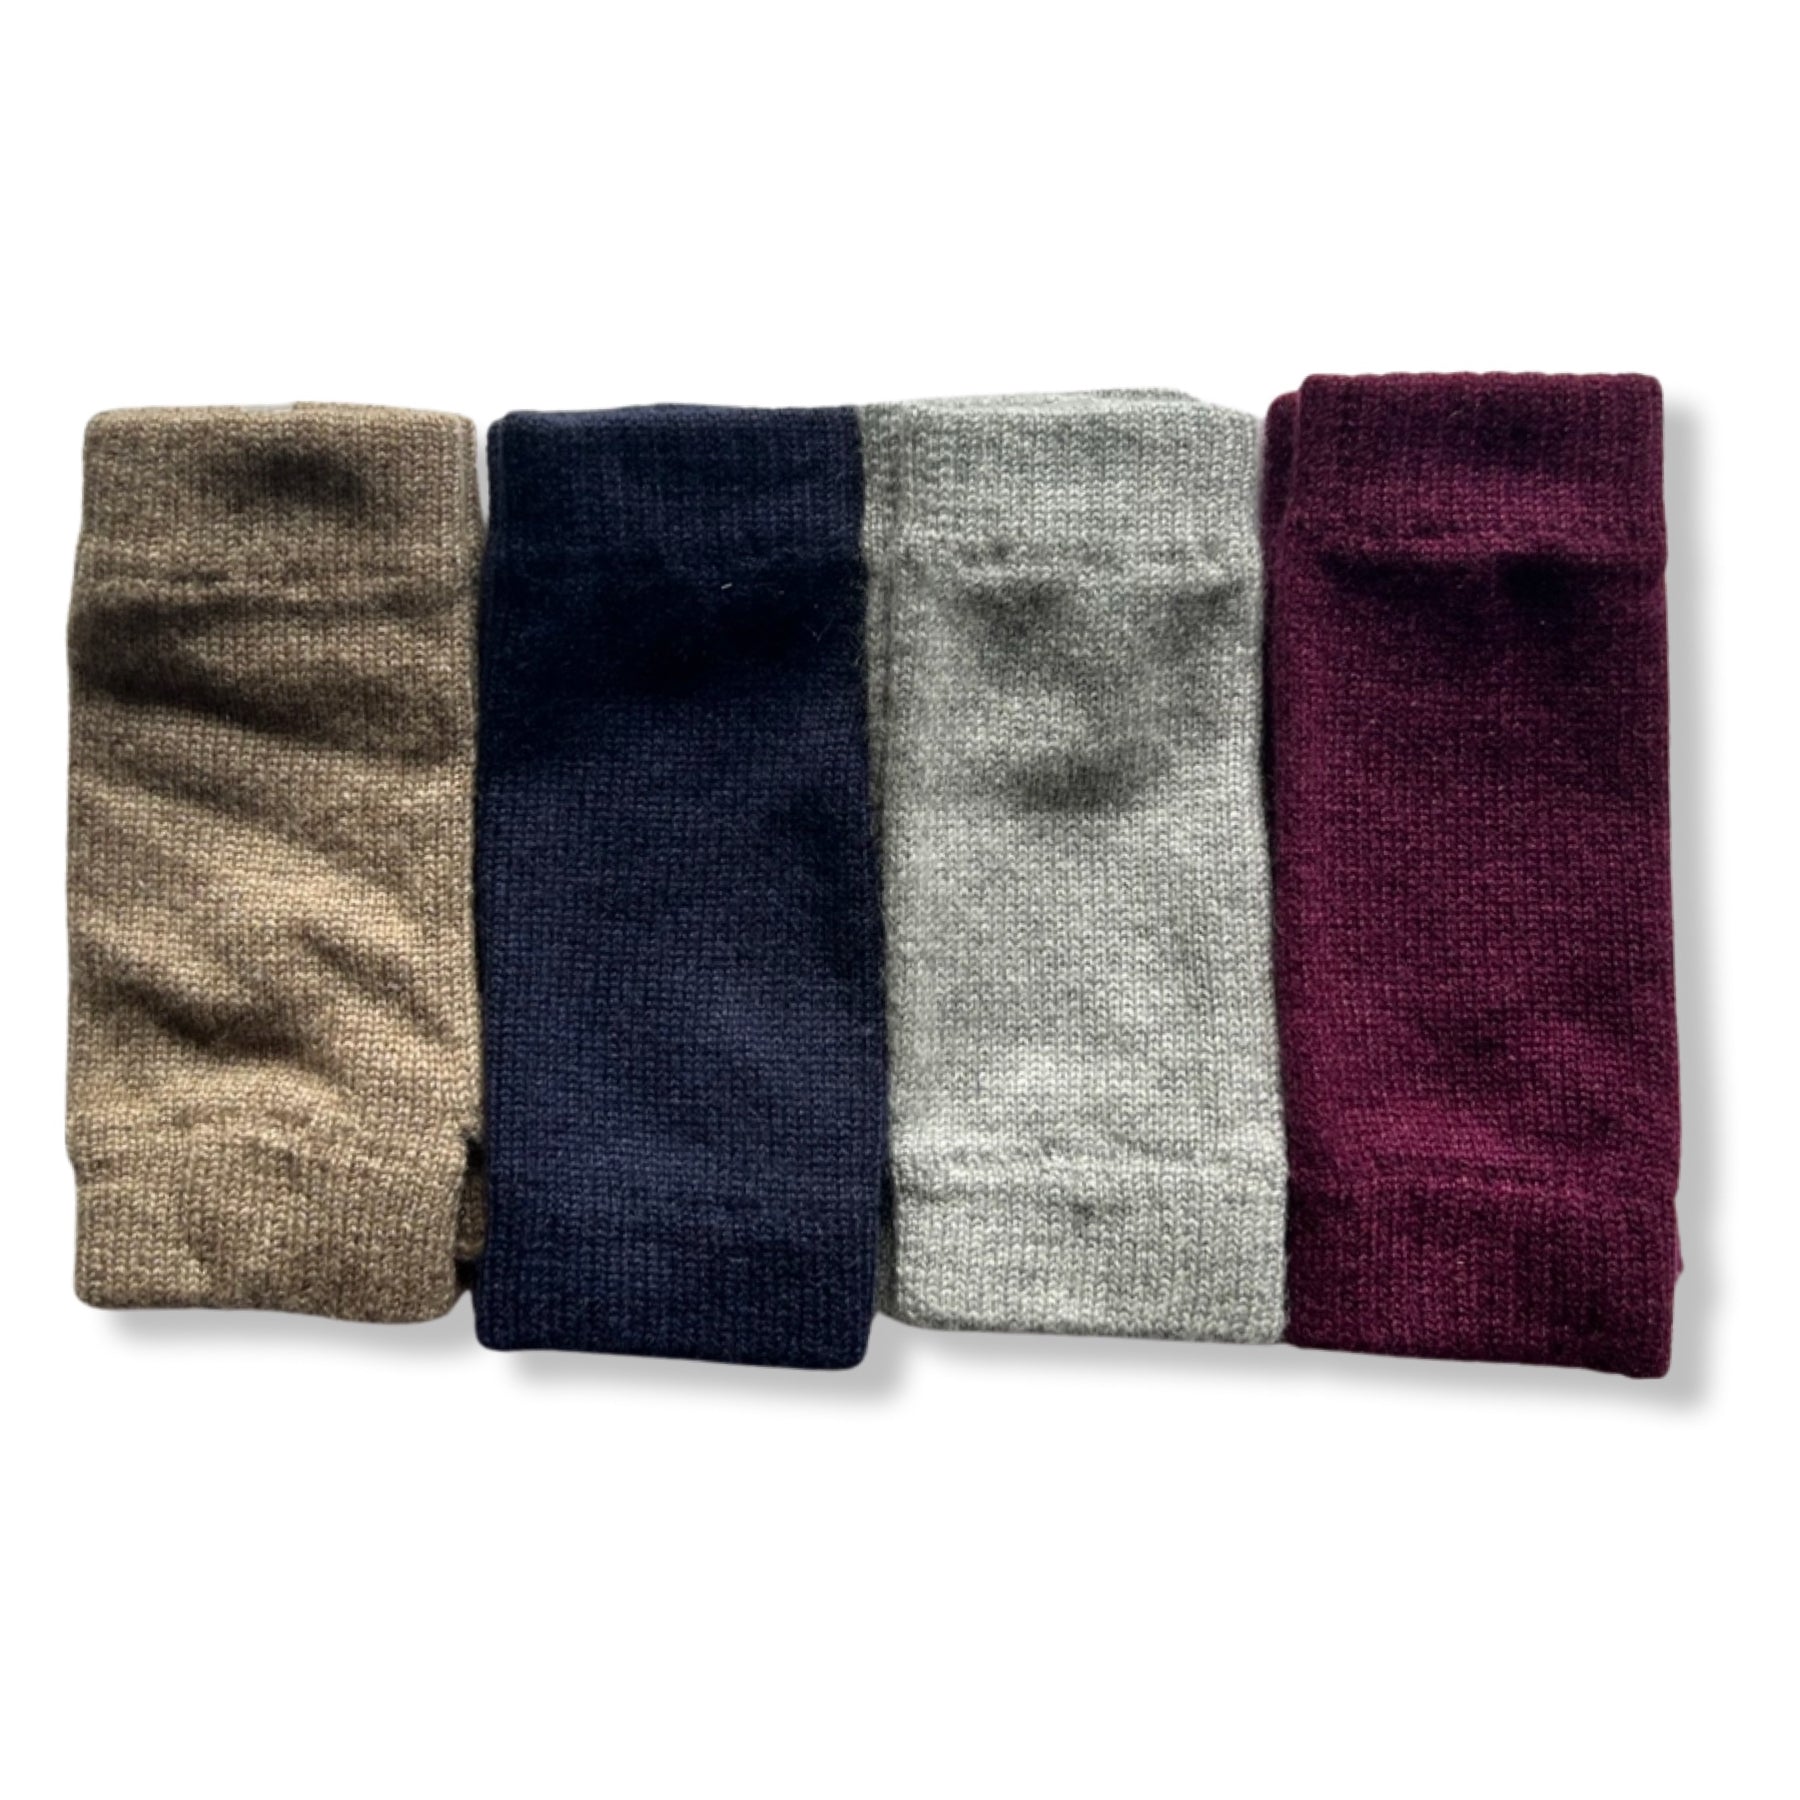 Cashmere Wrist Warmers, Scarves, Hickman & Bousfied - Hickman & Bousfield, Safari and Travel Clothing